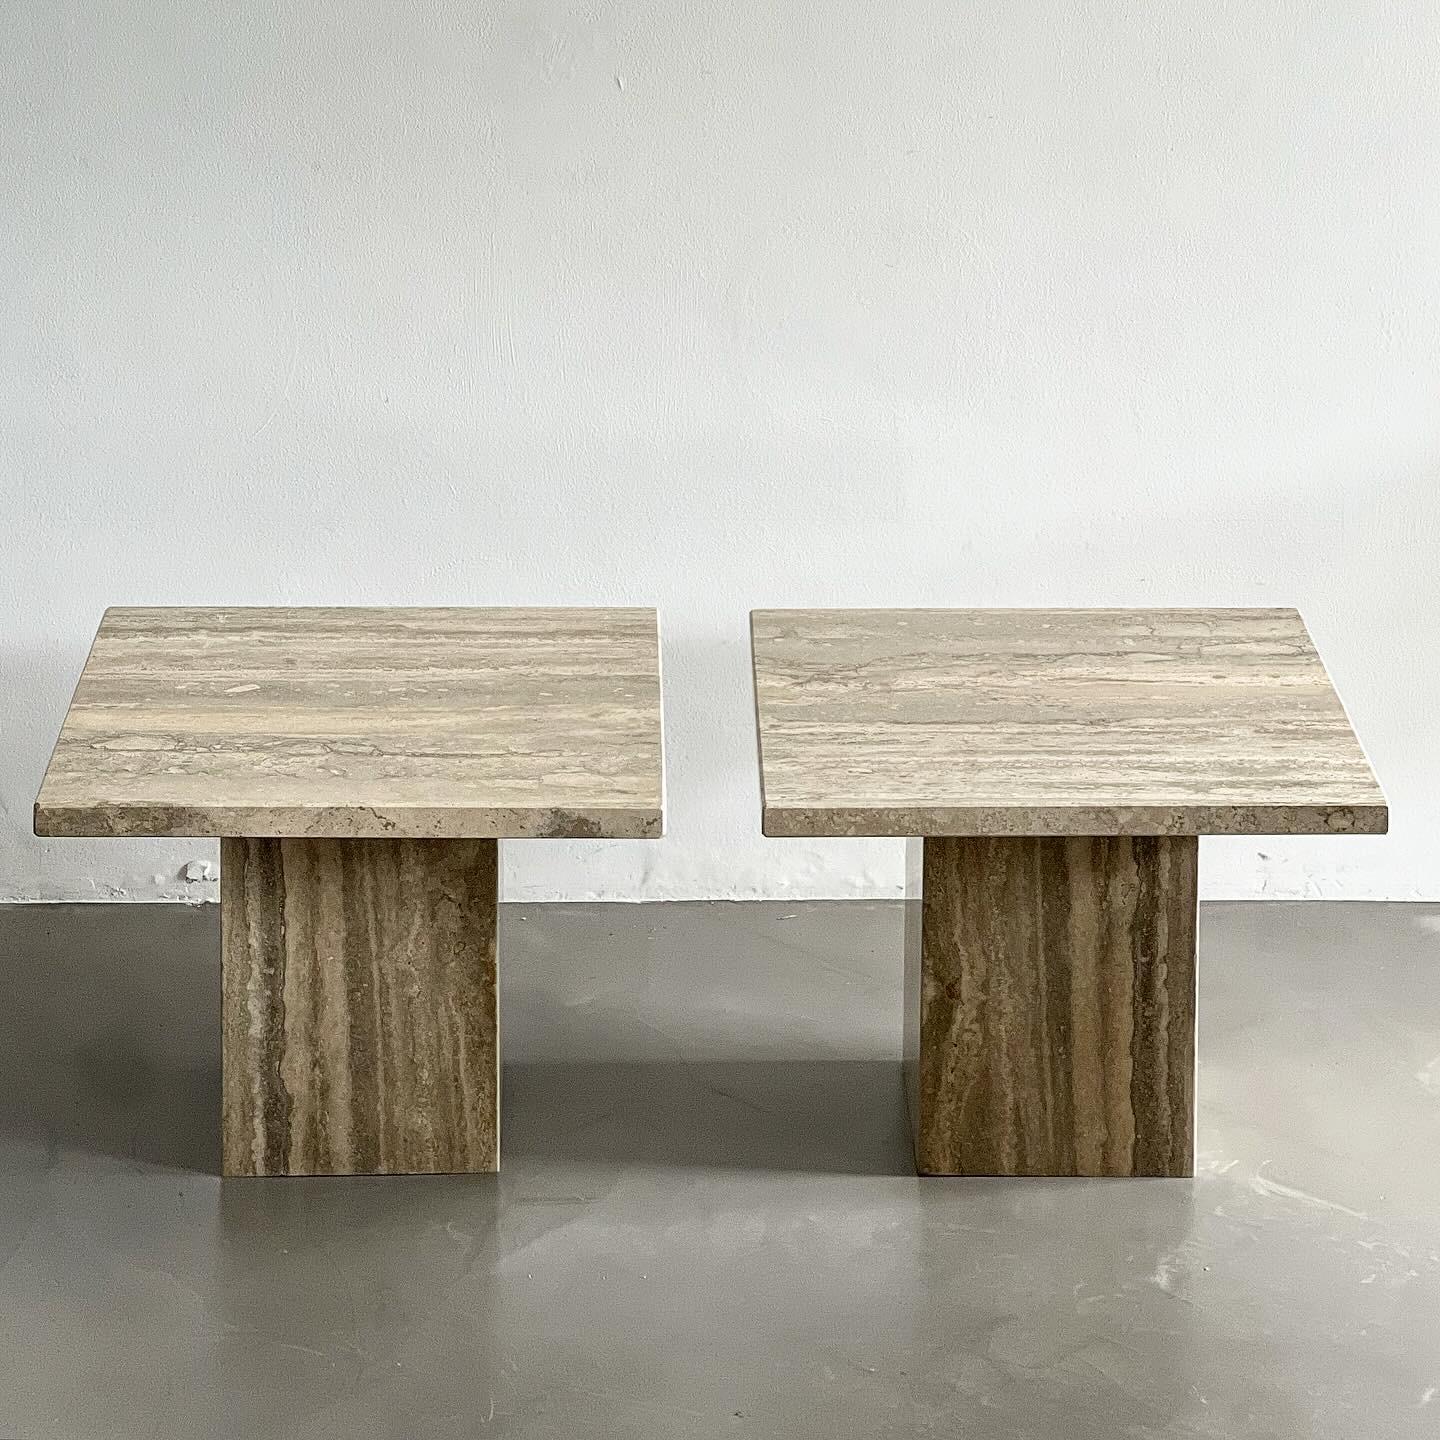 Late 20th Century Set of Two Mid-Century Modern Side Tables in Travertine, Urban Wabi Style, Pair For Sale